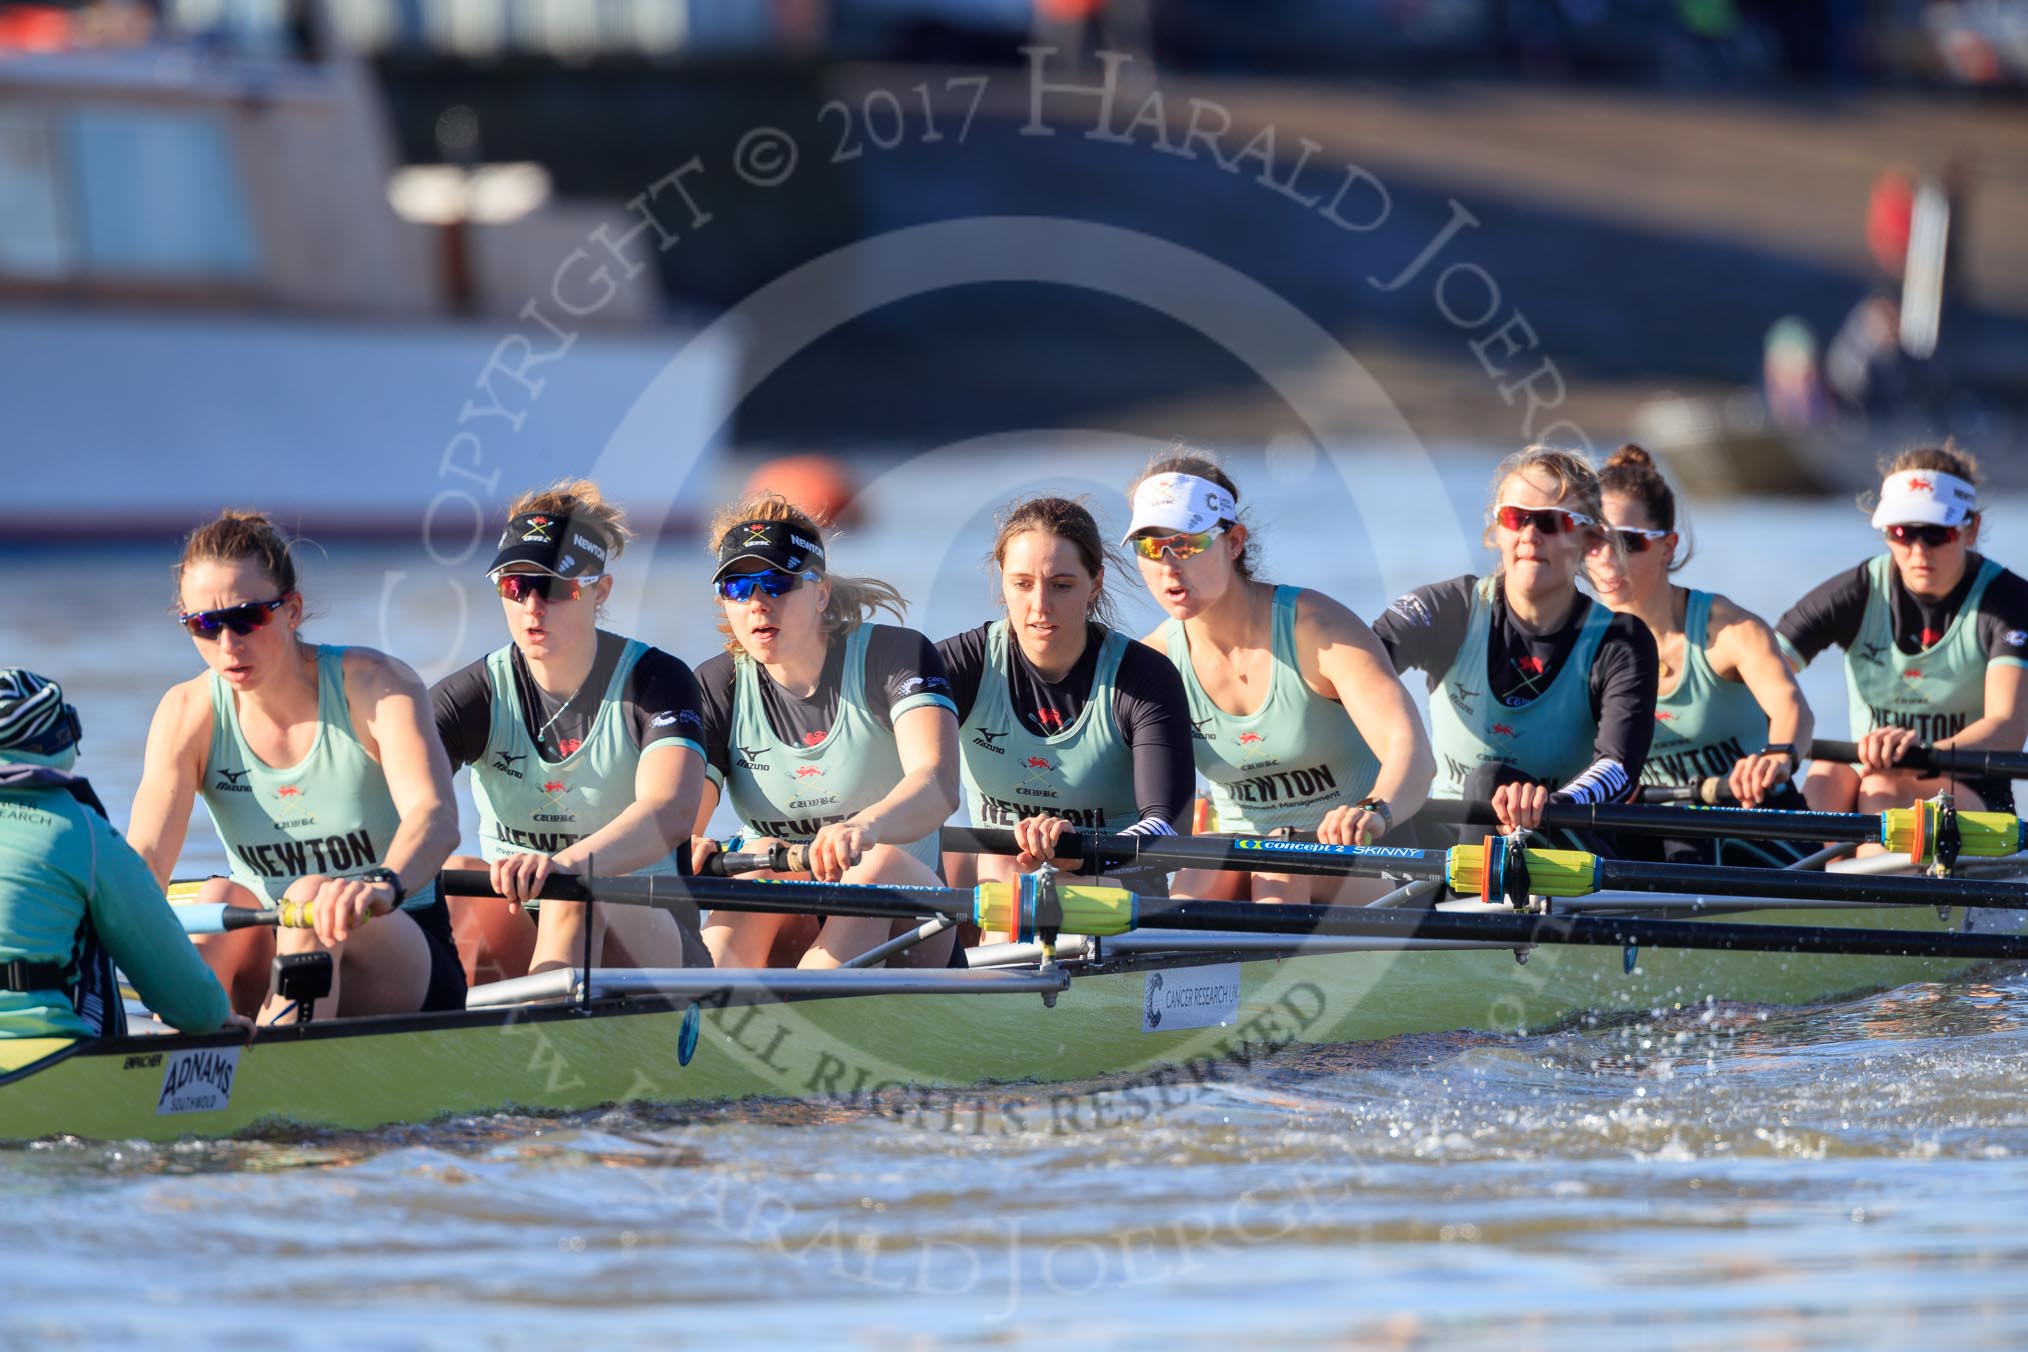 The Women's Boat Race season 2018 - fixture CUWBC vs. ULBC: The race has been started - OUWBC with cox Sophie Shapter, stroke Tricia Smith, 7 Imogen Grant, 6 Anne Beenken, 5 Thea Zabell, 4 Paula Wesselmann, 3 Alice White, 2 Myriam Goudet-Boukhatmi, bow Olivia Coffey.
River Thames between Putney Bridge and Mortlake,
London SW15,

United Kingdom,
on 17 February 2018 at 13:09, image #46